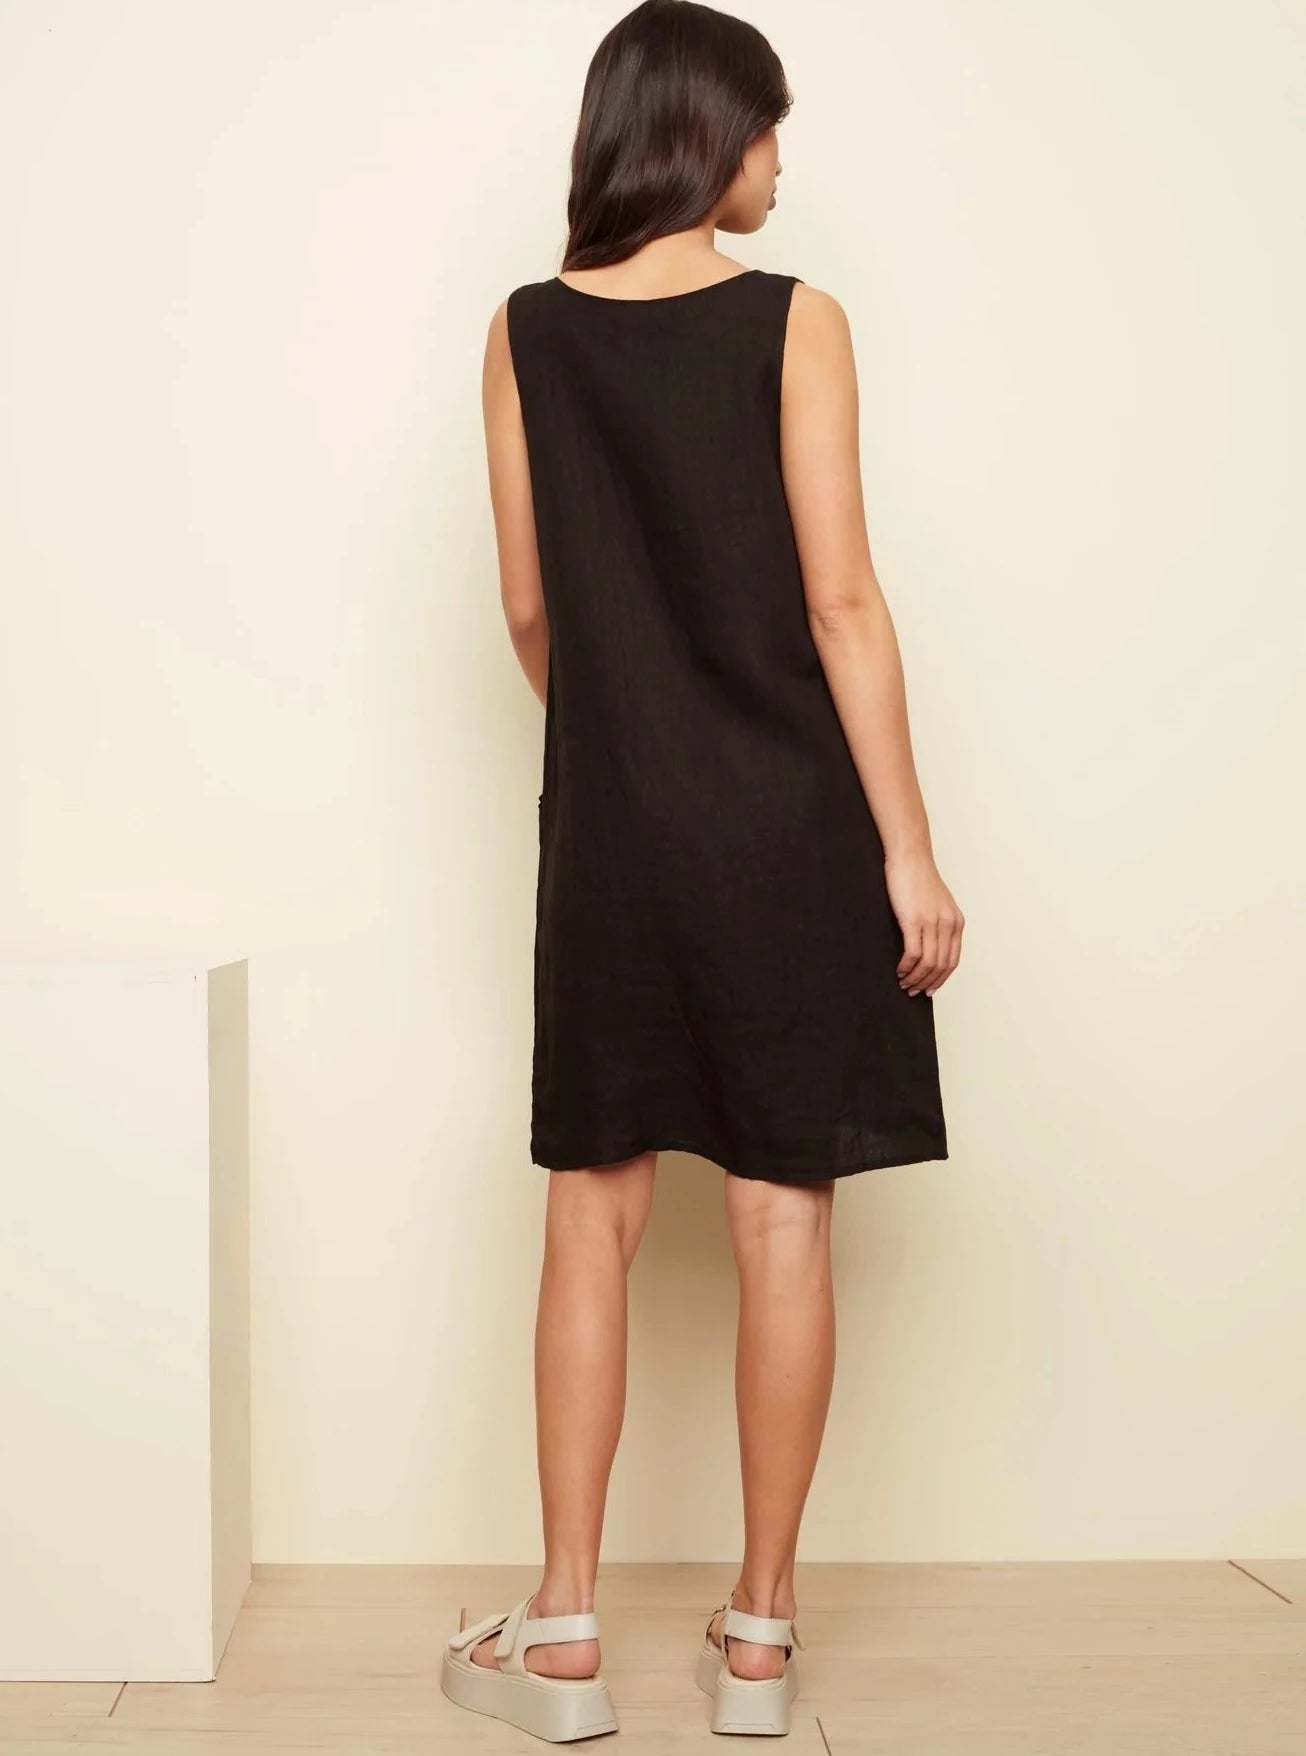 Sleeveless Solid Dress With V-Neck and Pockets [Black-C3115]